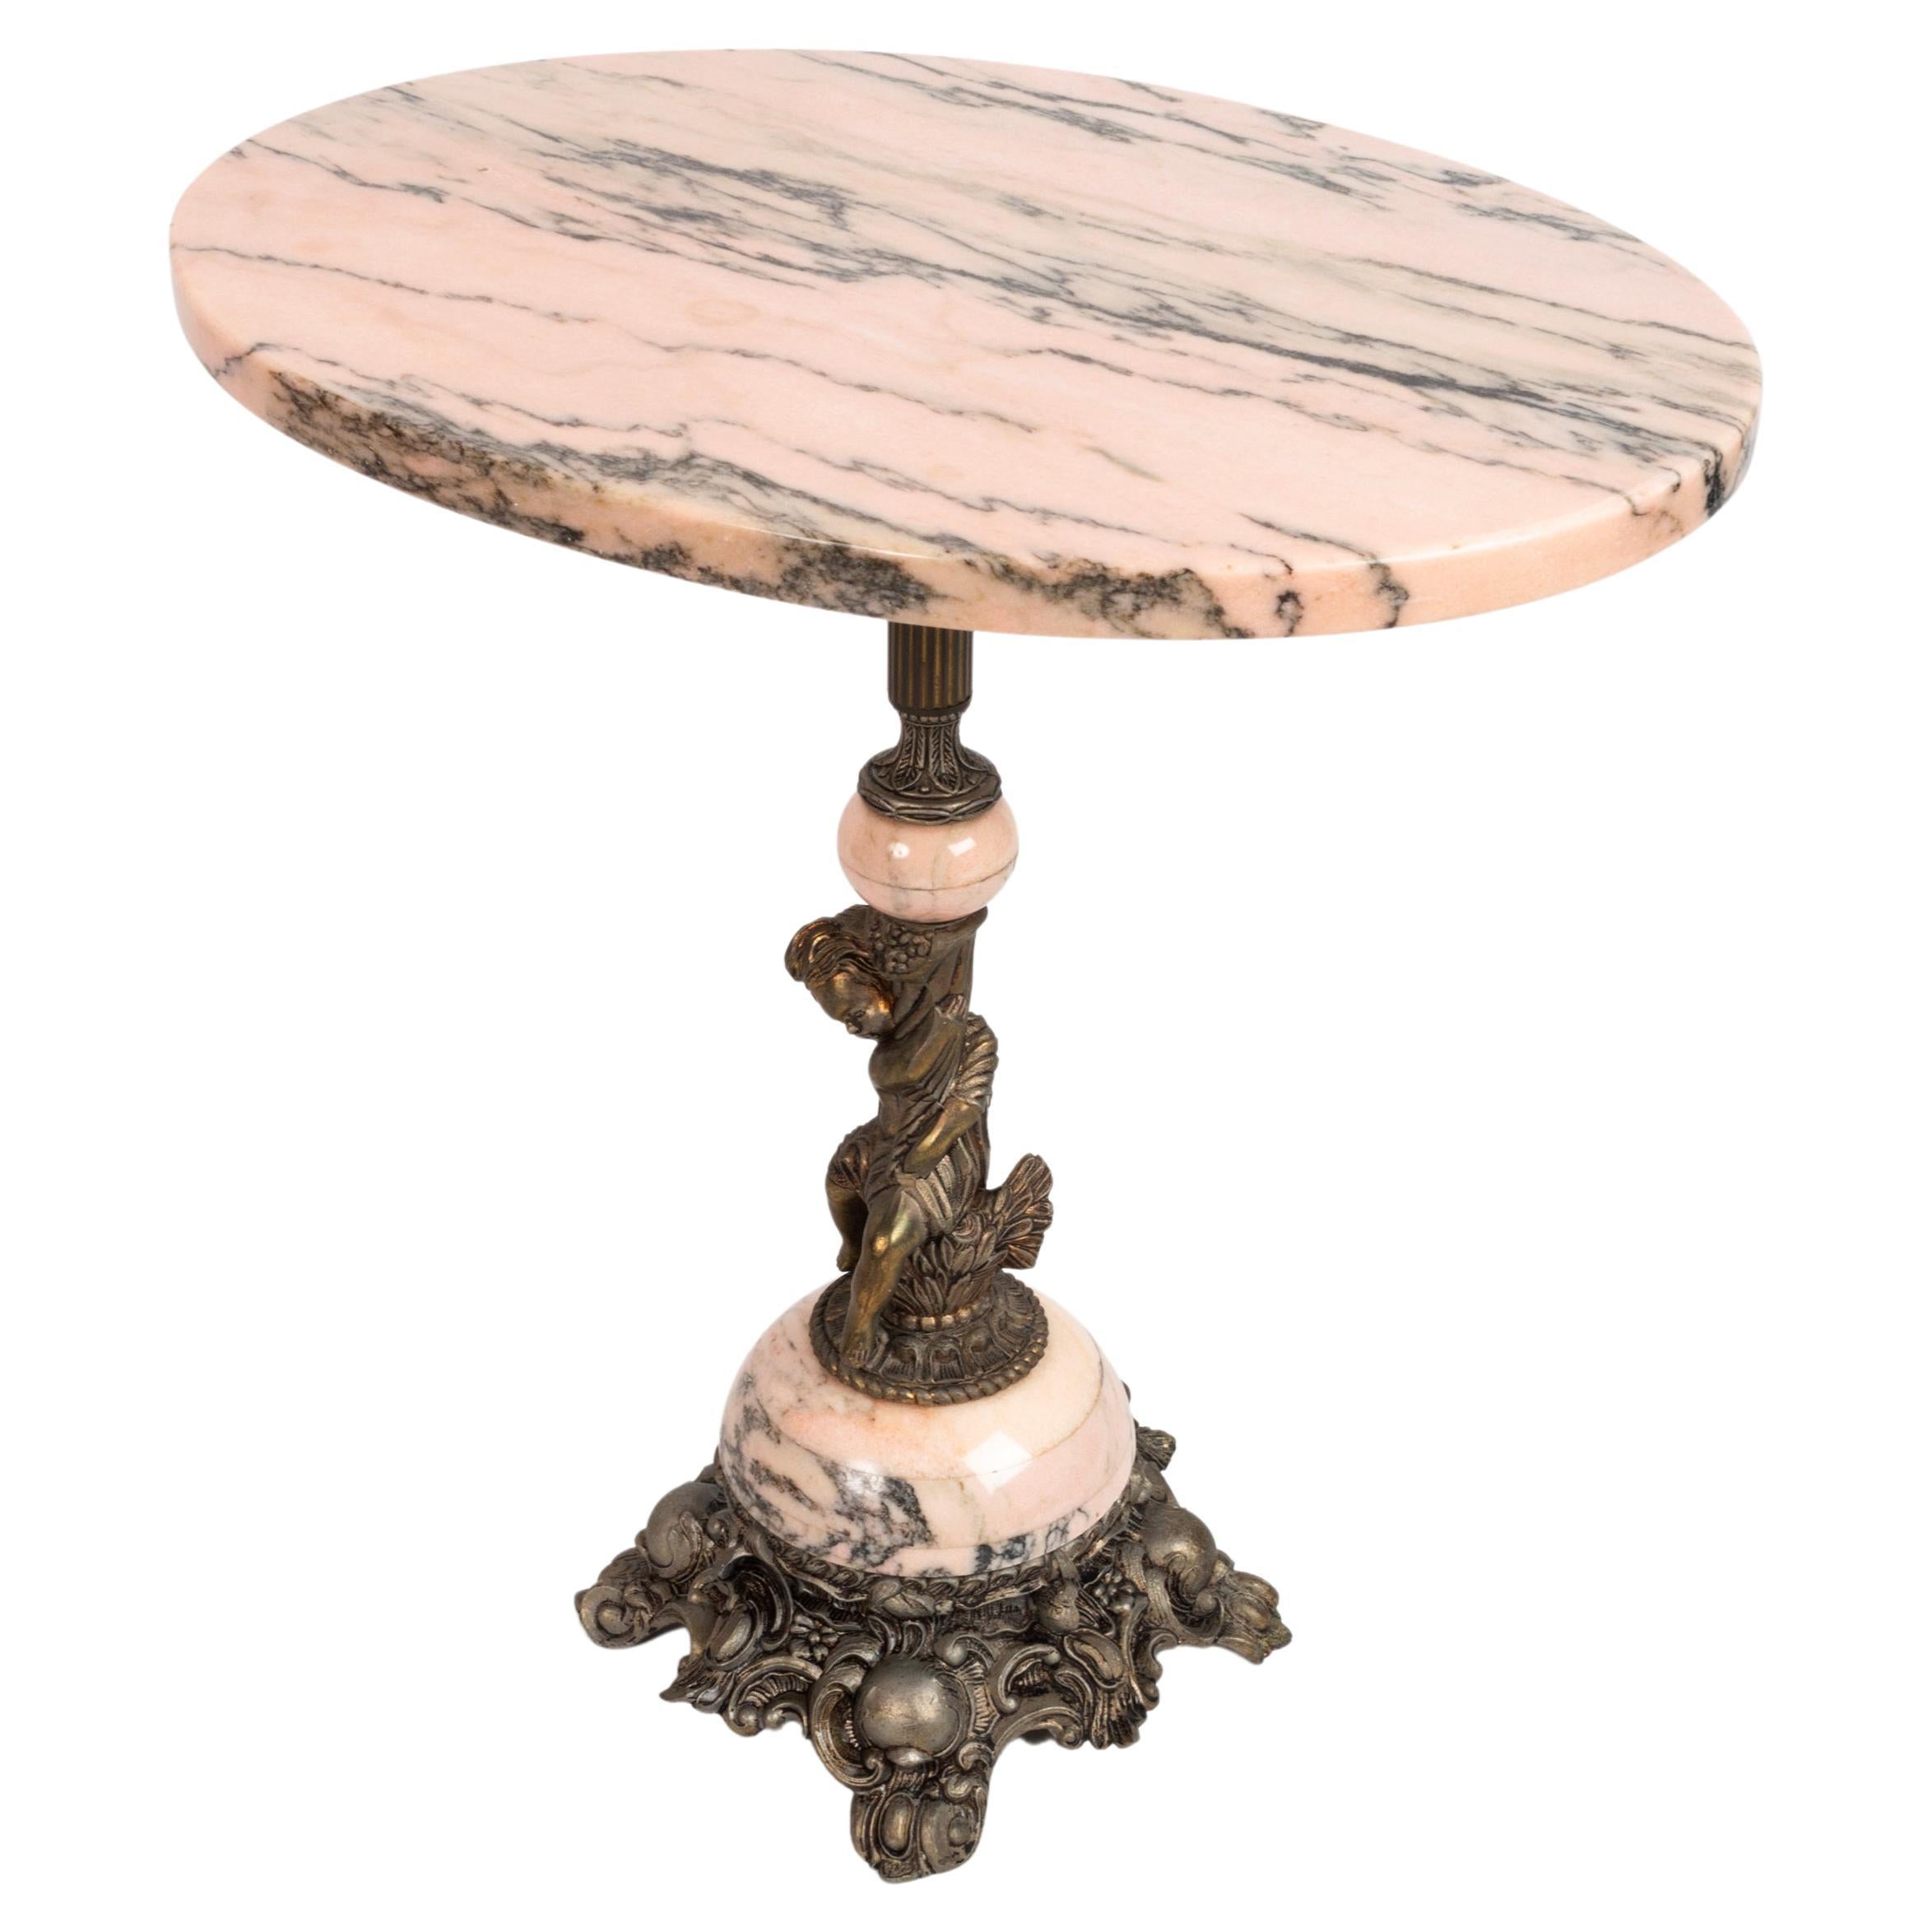 Art Deco French side table in pink marble and gilded bronze Maison Jansen C.1940

In very good condition commensurate with age.